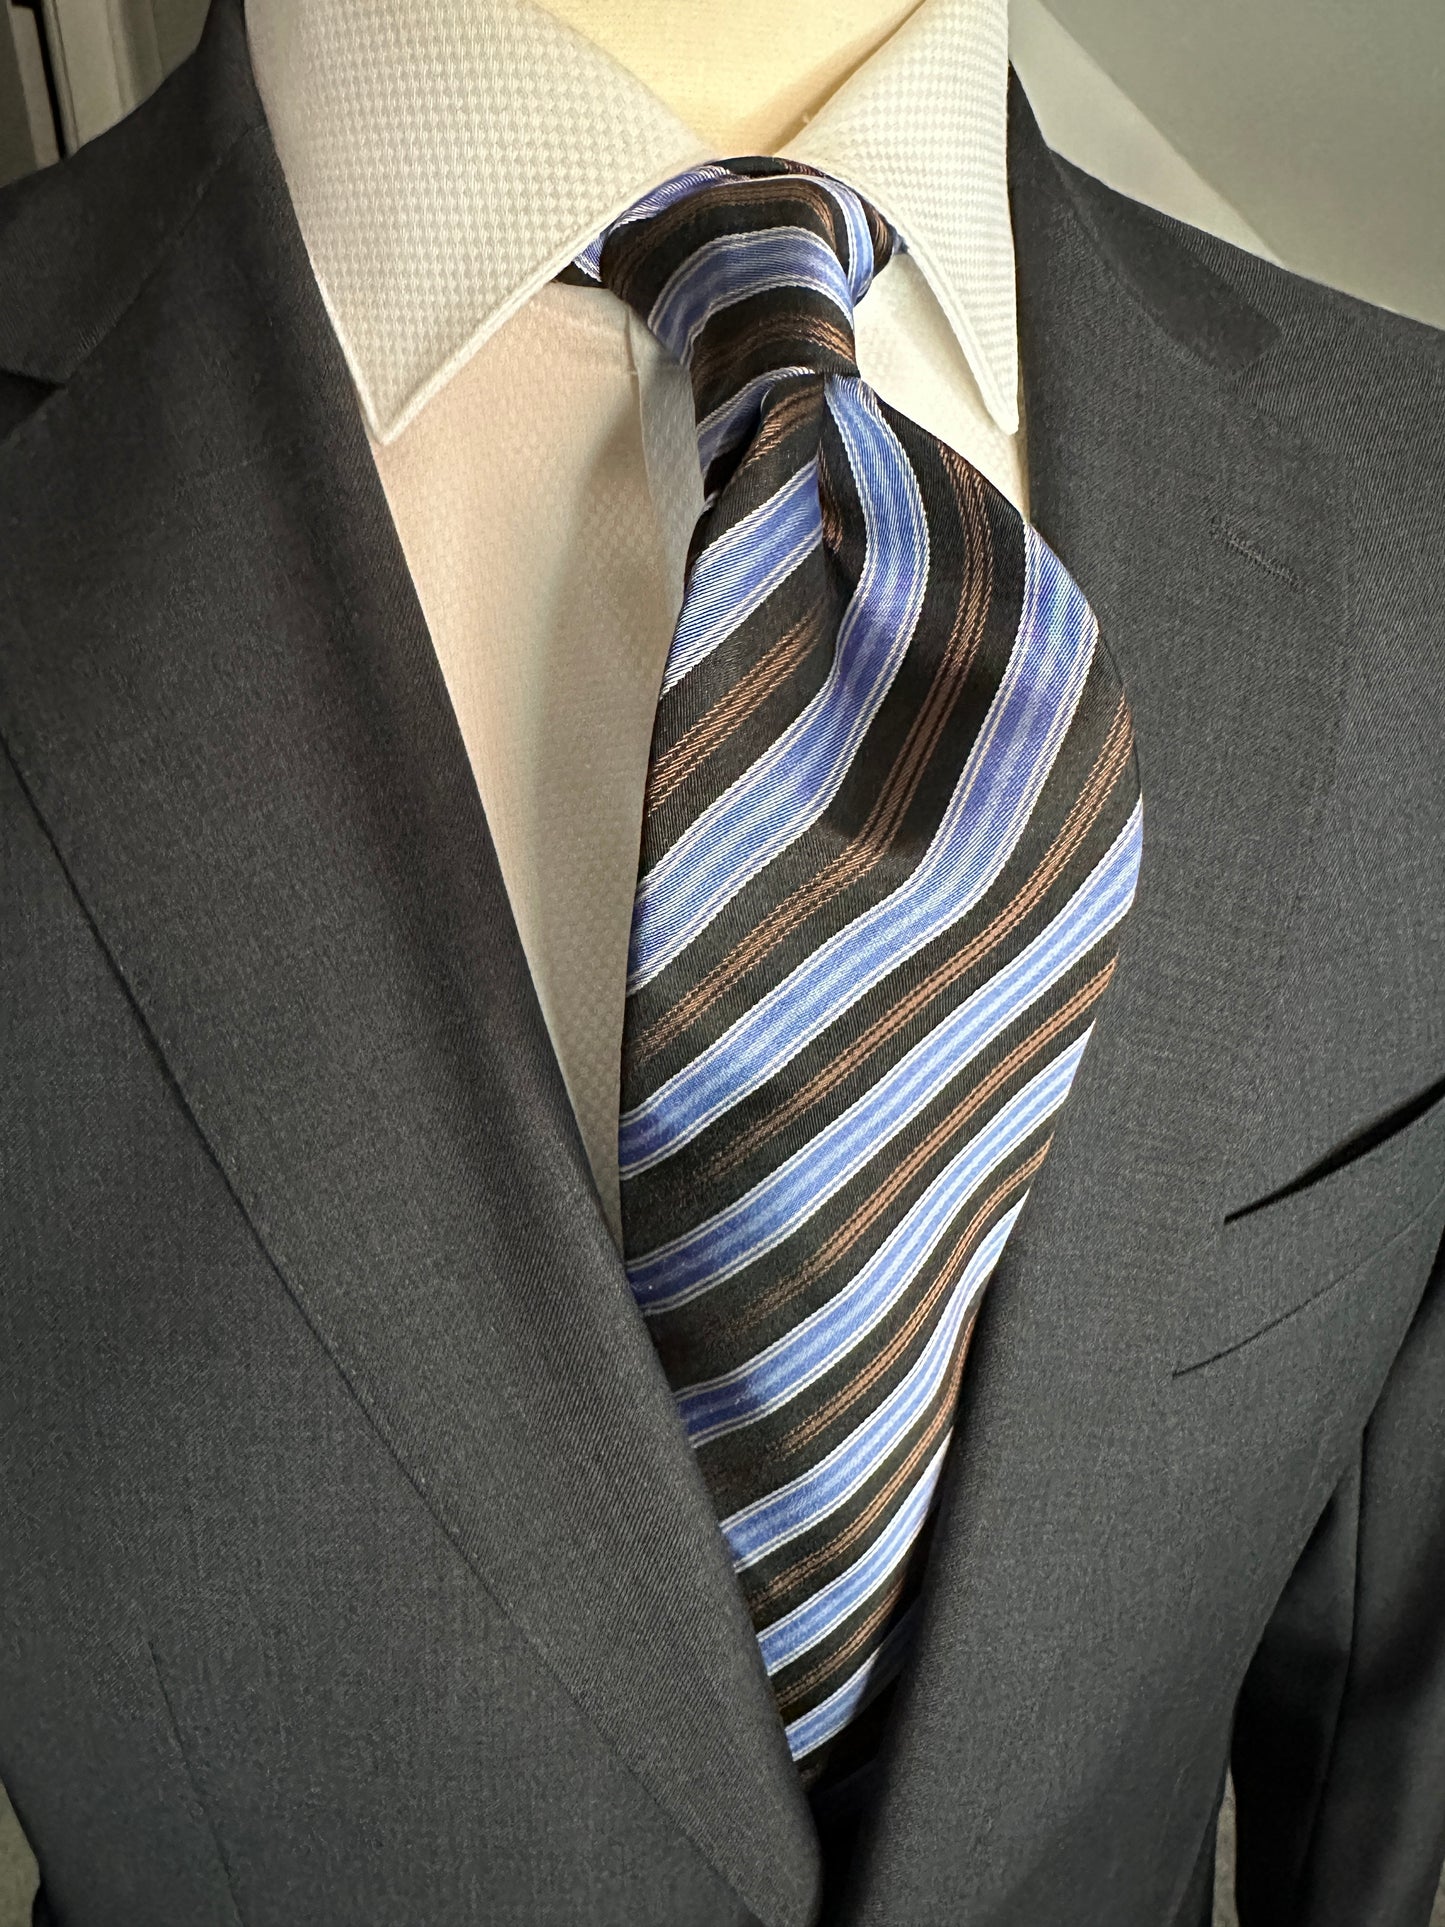 A wonderful 100% silk woven tie in clean stripes. Here we have a complimentary mixture of colors from brown and black with baby blue and white. This tie is a great business tie and would look great paired with many suit variations from black, navy, charcoal and pinstripes as well. Suits with windowpanes always do well with striped neckwear.